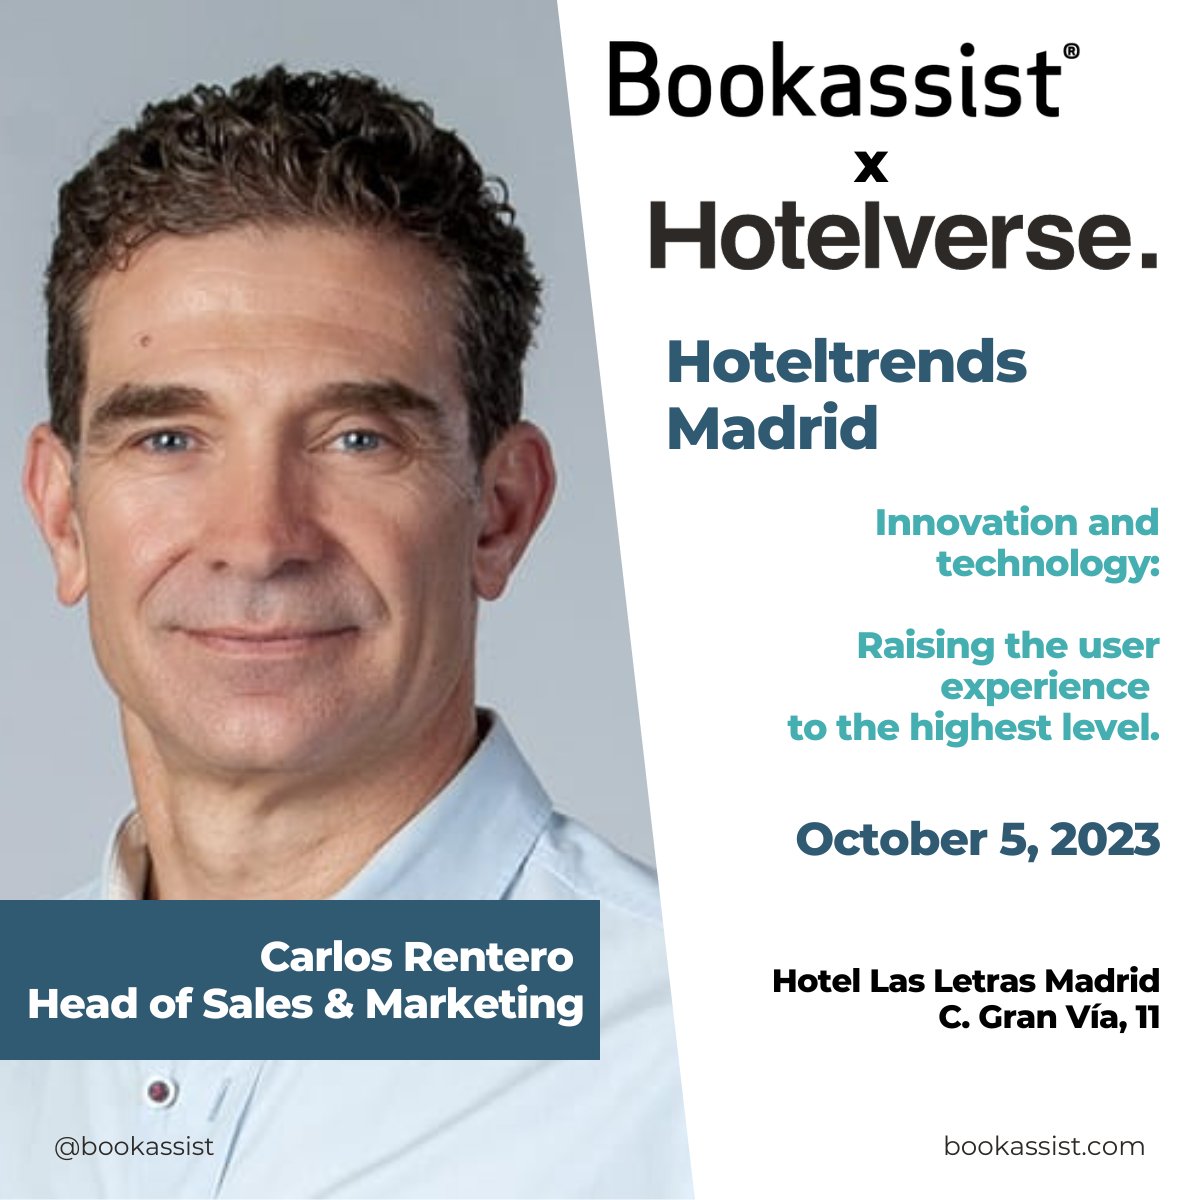 🗓️ Upcoming event! Find our Head of Sales and Marketing, Carlos Rentero, at the Hoteltrends Madrid event, organized by Hotelverse, this Thursday in Madrid. All agenda information is available here: hubs.li/Q0246_Kt0 #BookassistEvent